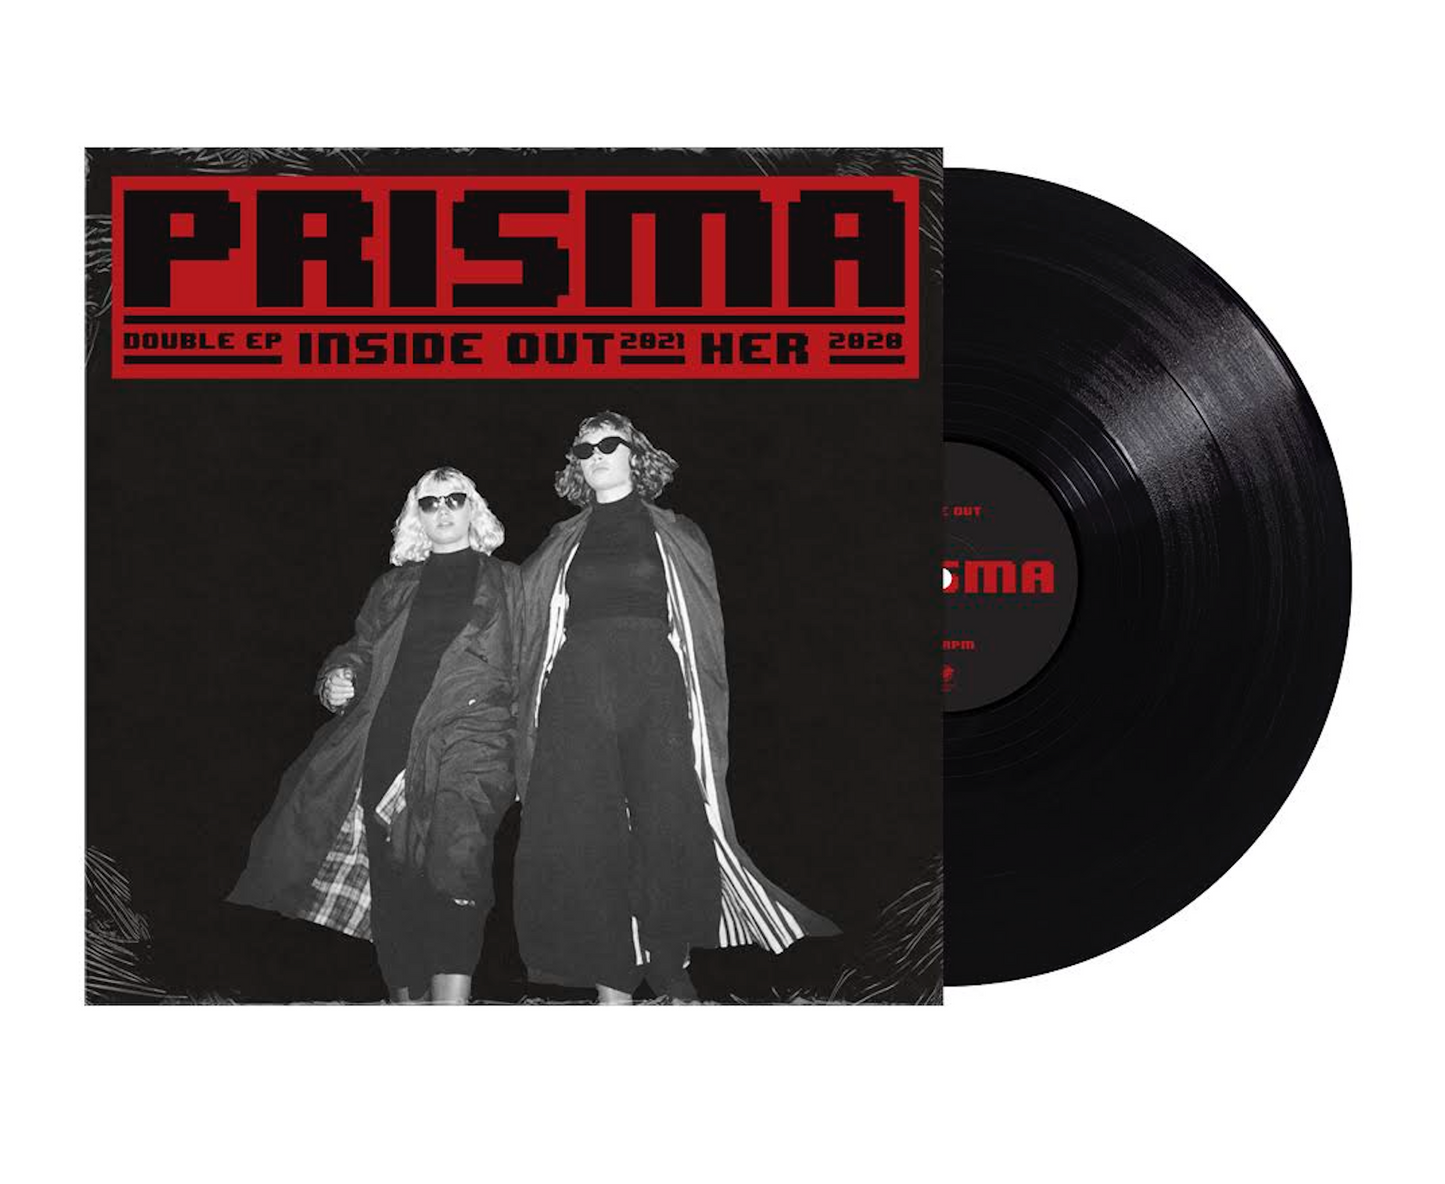 Prisma - Inside Out/Her